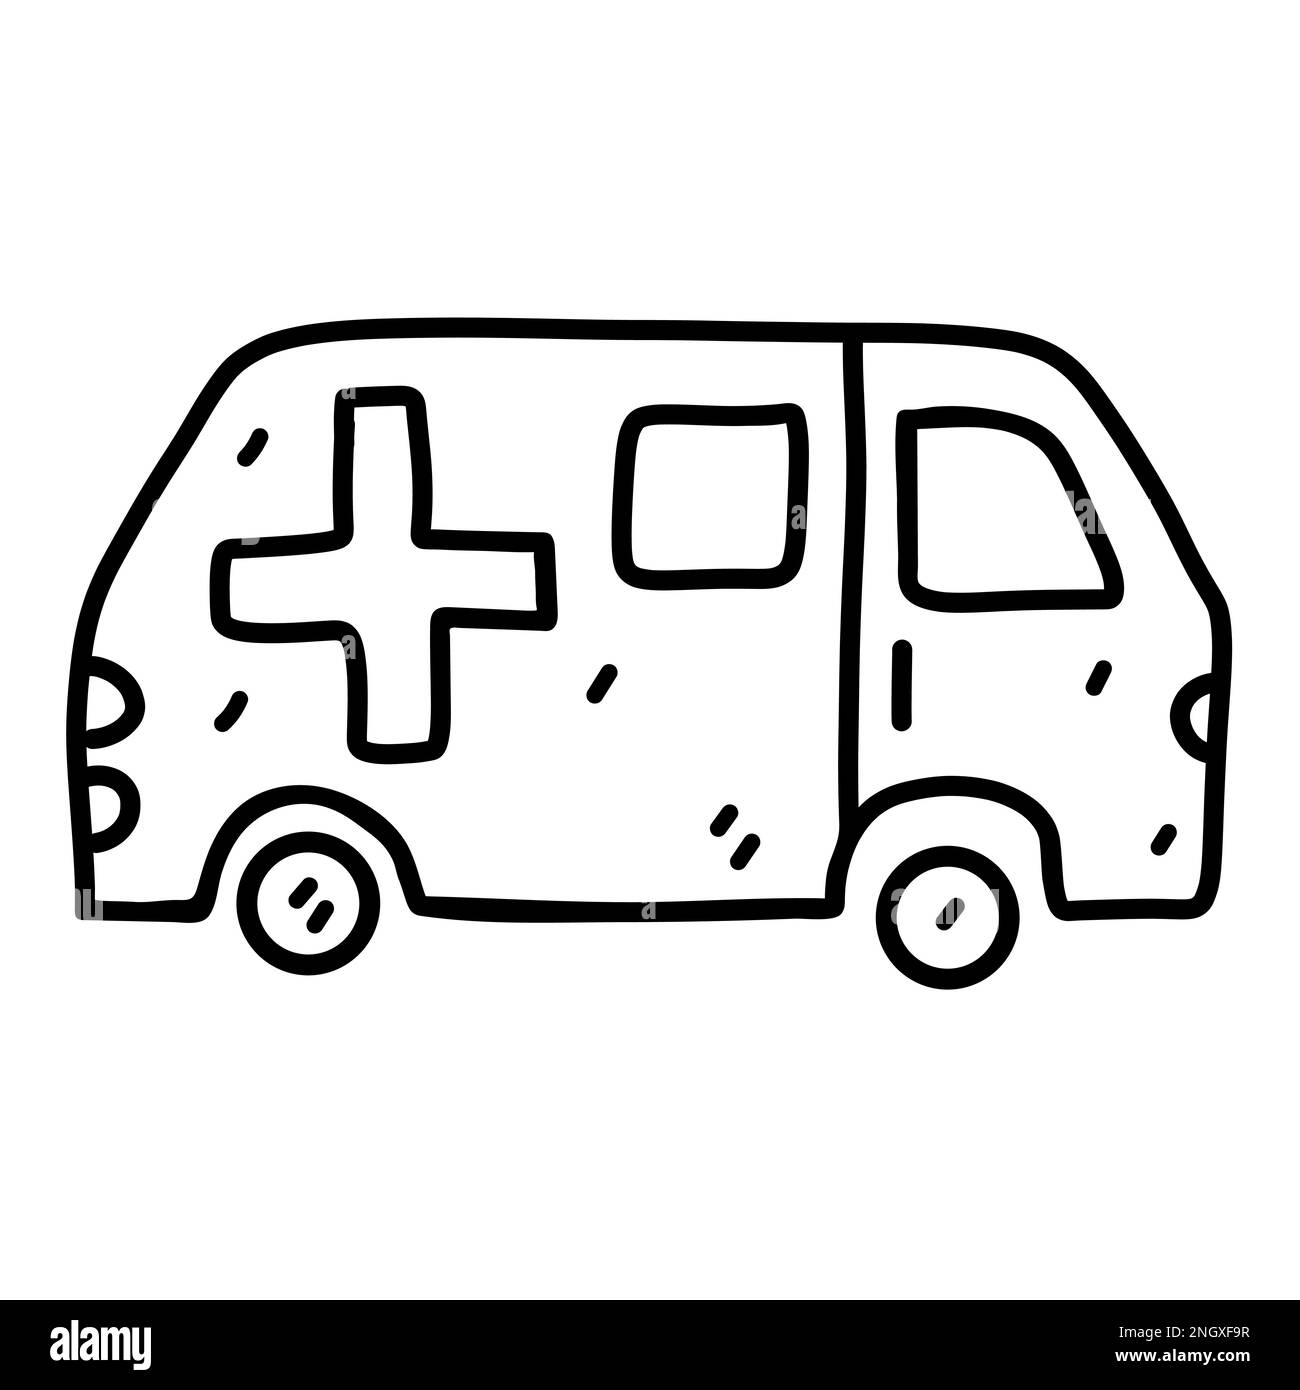 Ambulance in hand drawn doodle style. Vector illustration isolated on white background Stock Vector